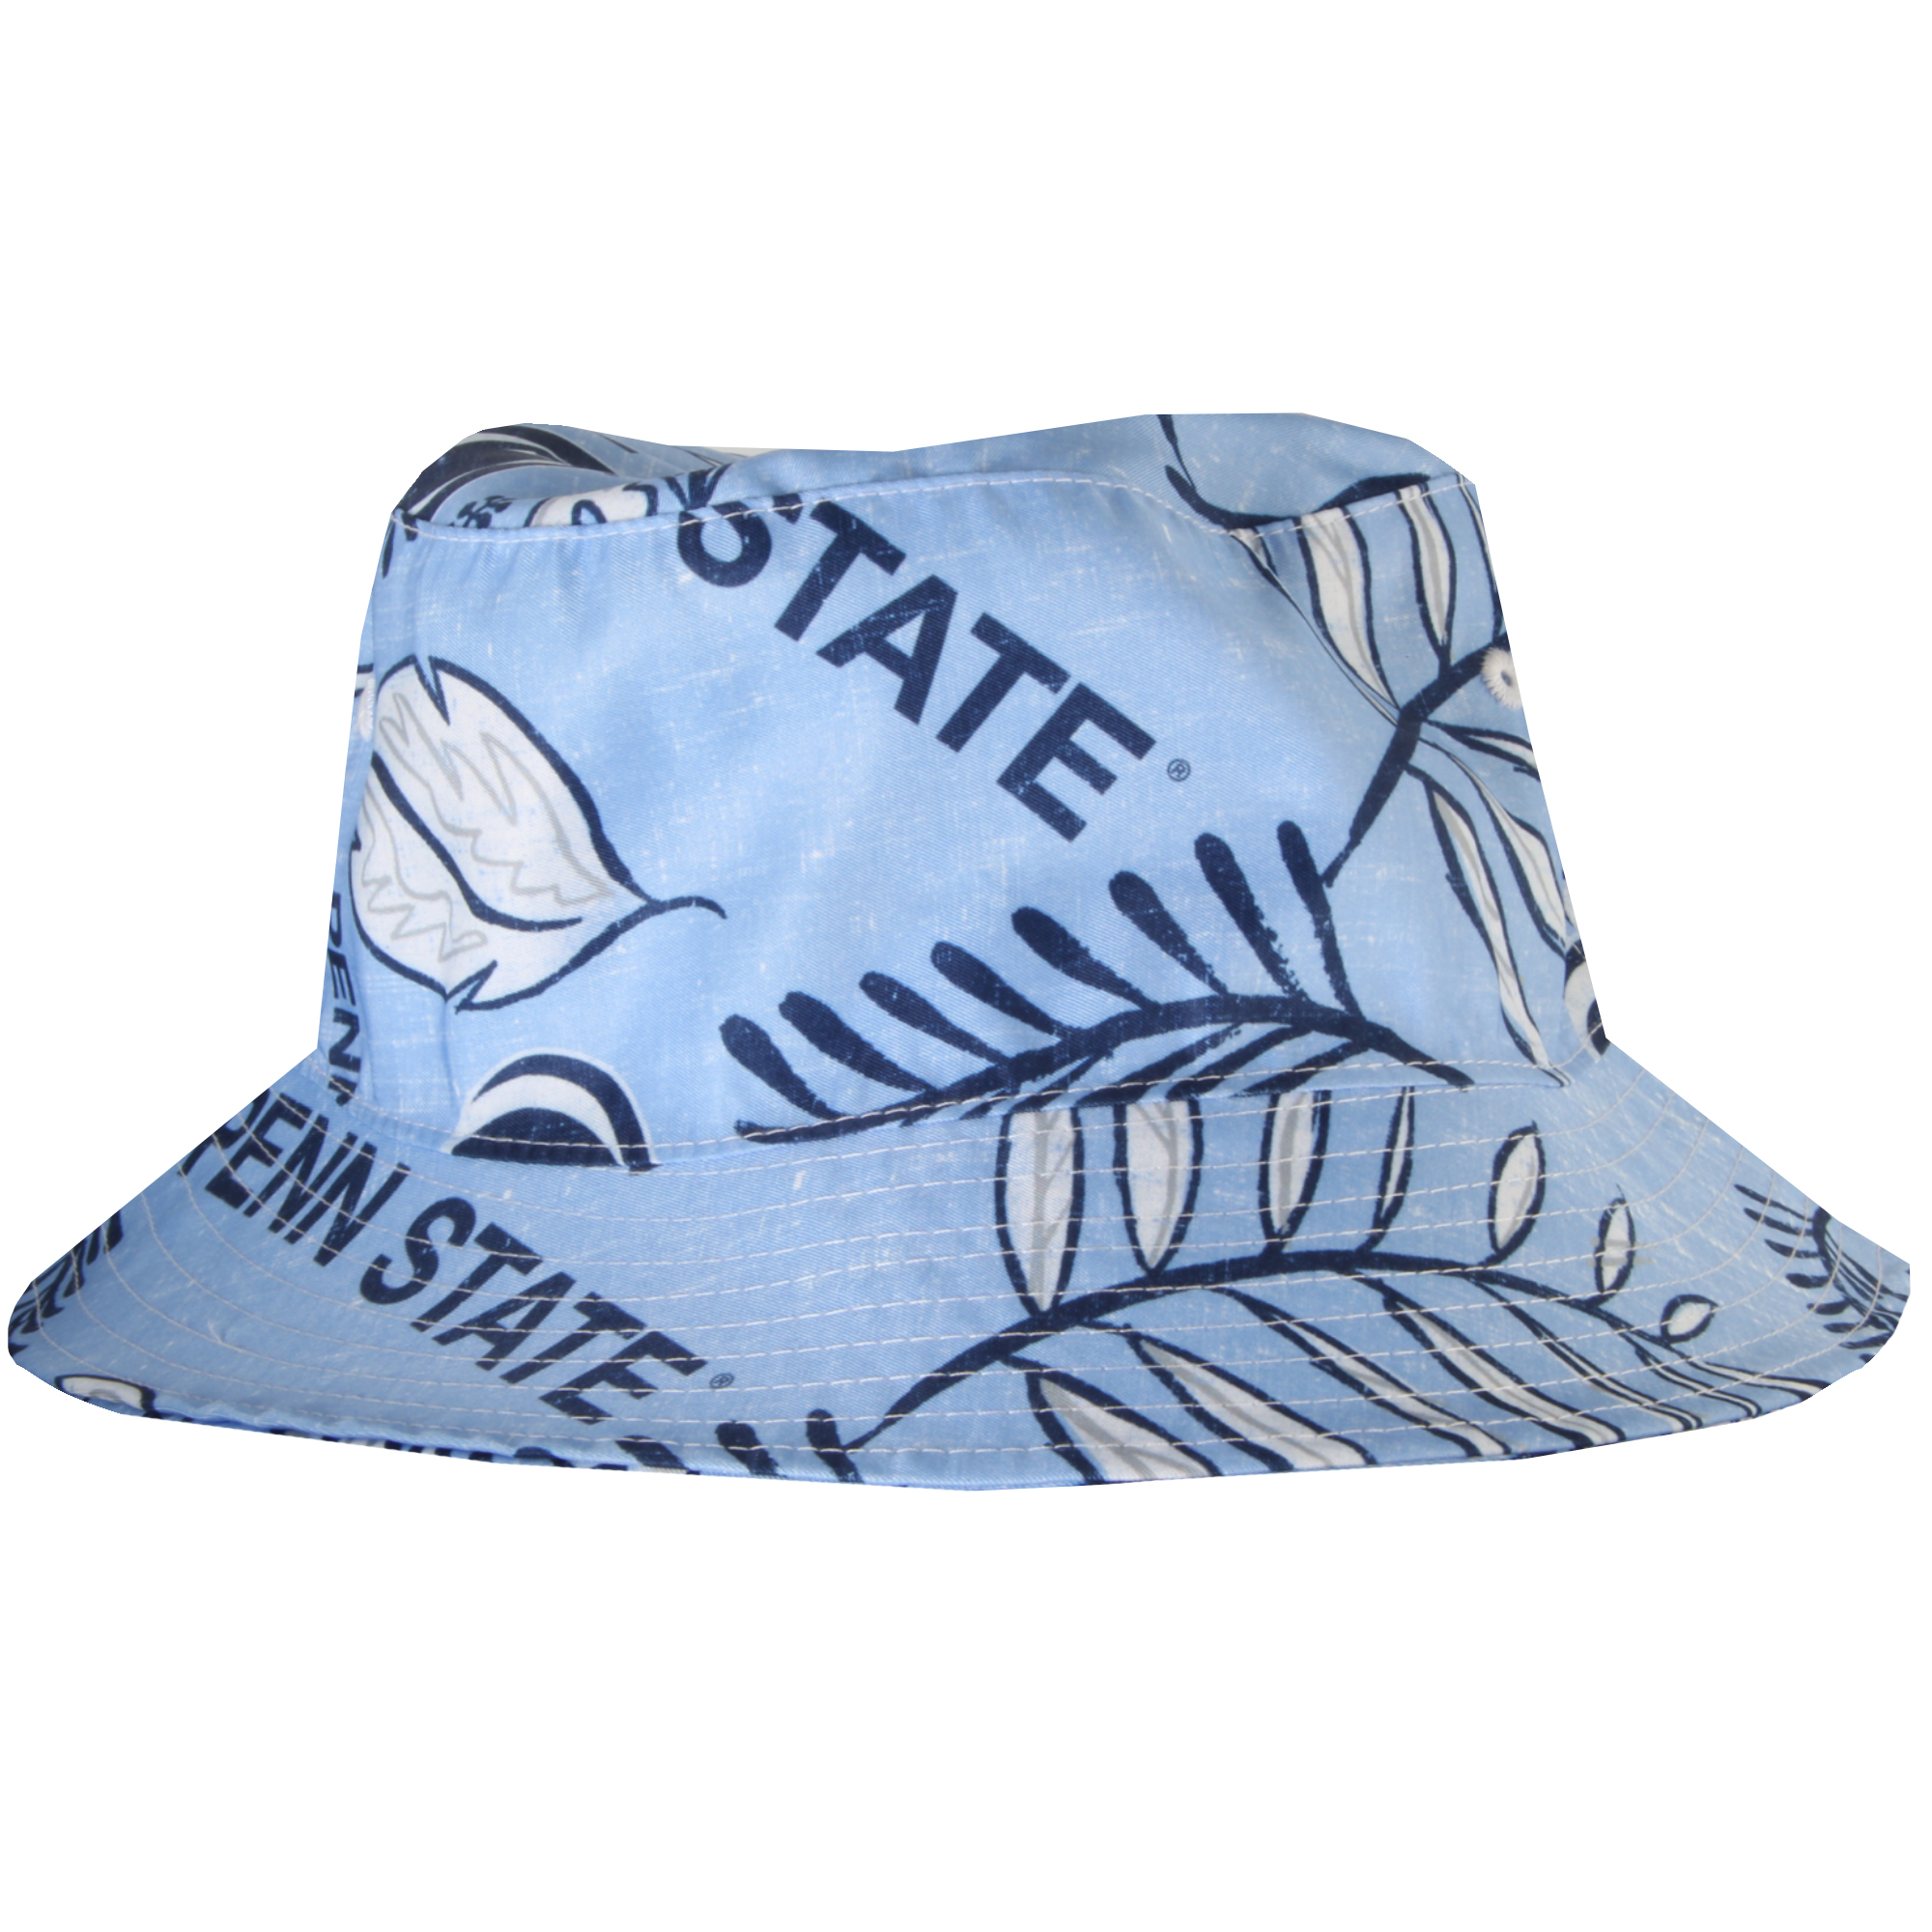 Wes And Willy Penn State Nittany Lions Vintage Floral Bucket Hat